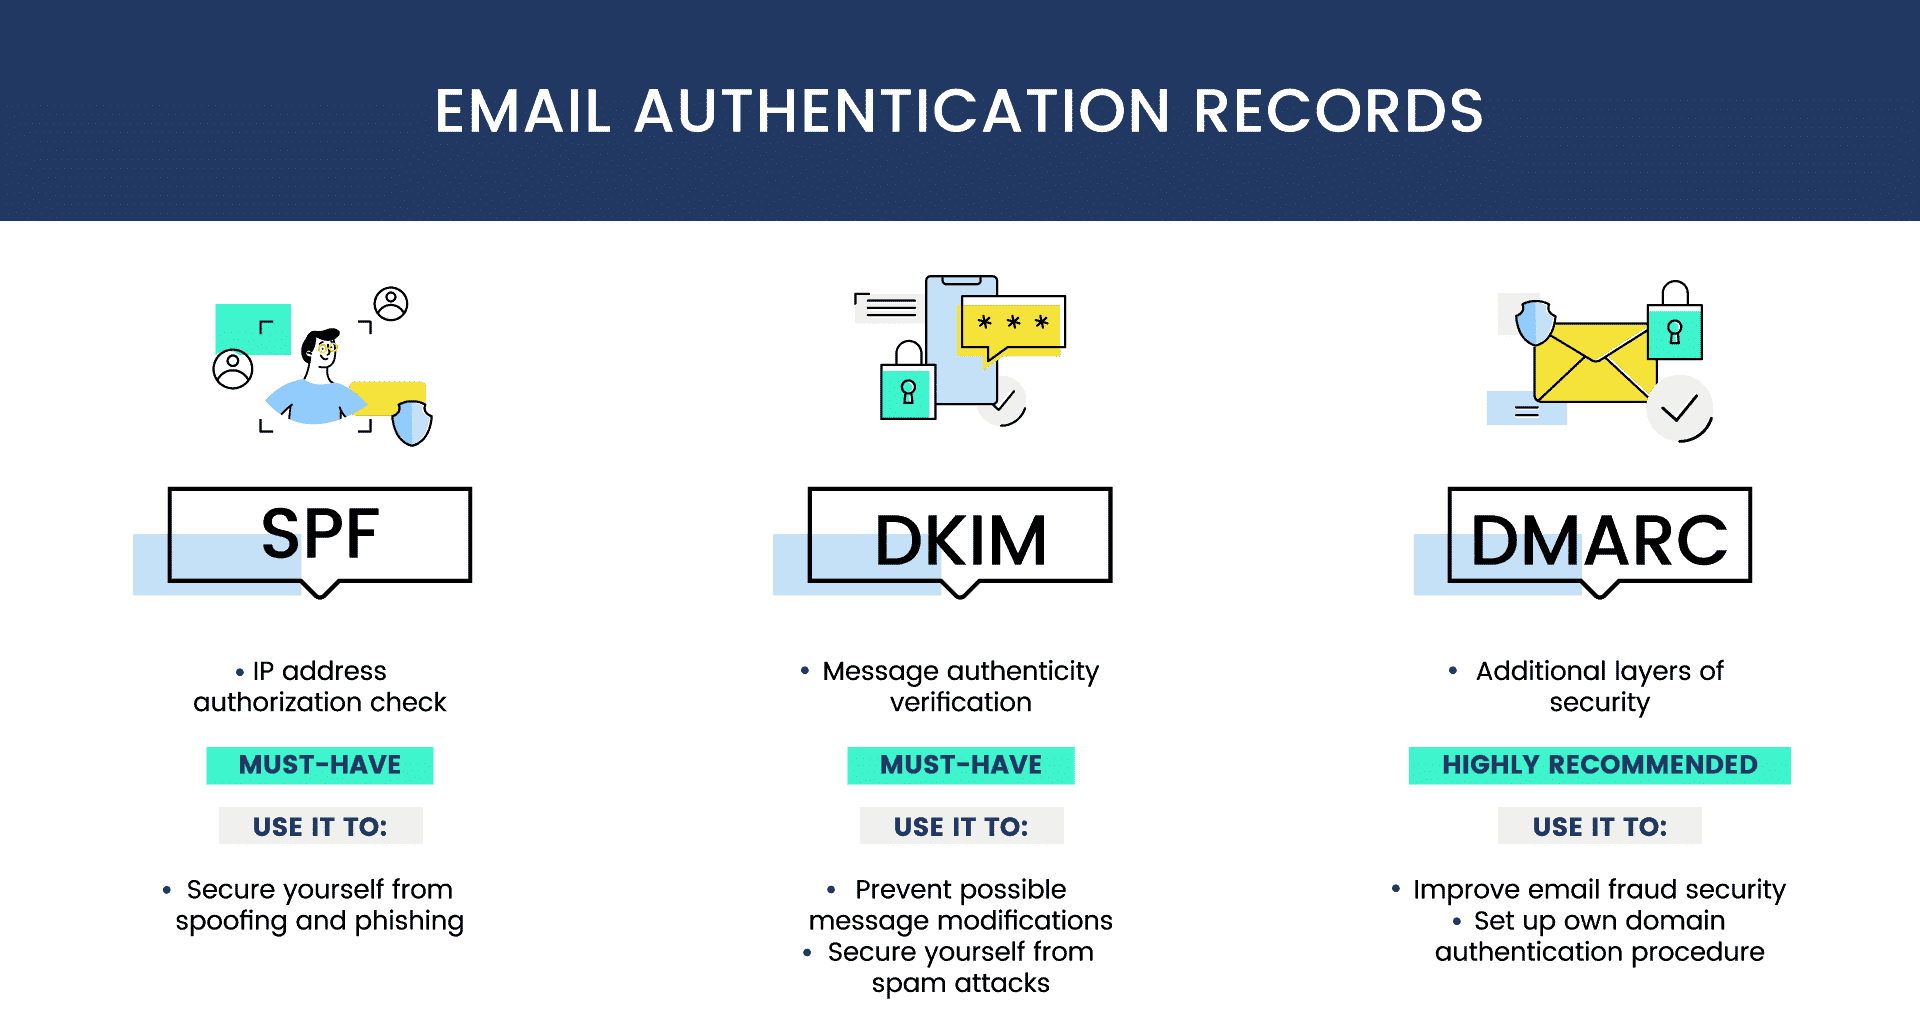 An informative image illustrating the three essential email authentication records - SPF and DKIM, and DMARC, each with icons and brief descriptions of their purposes and importance in enhancing email security.